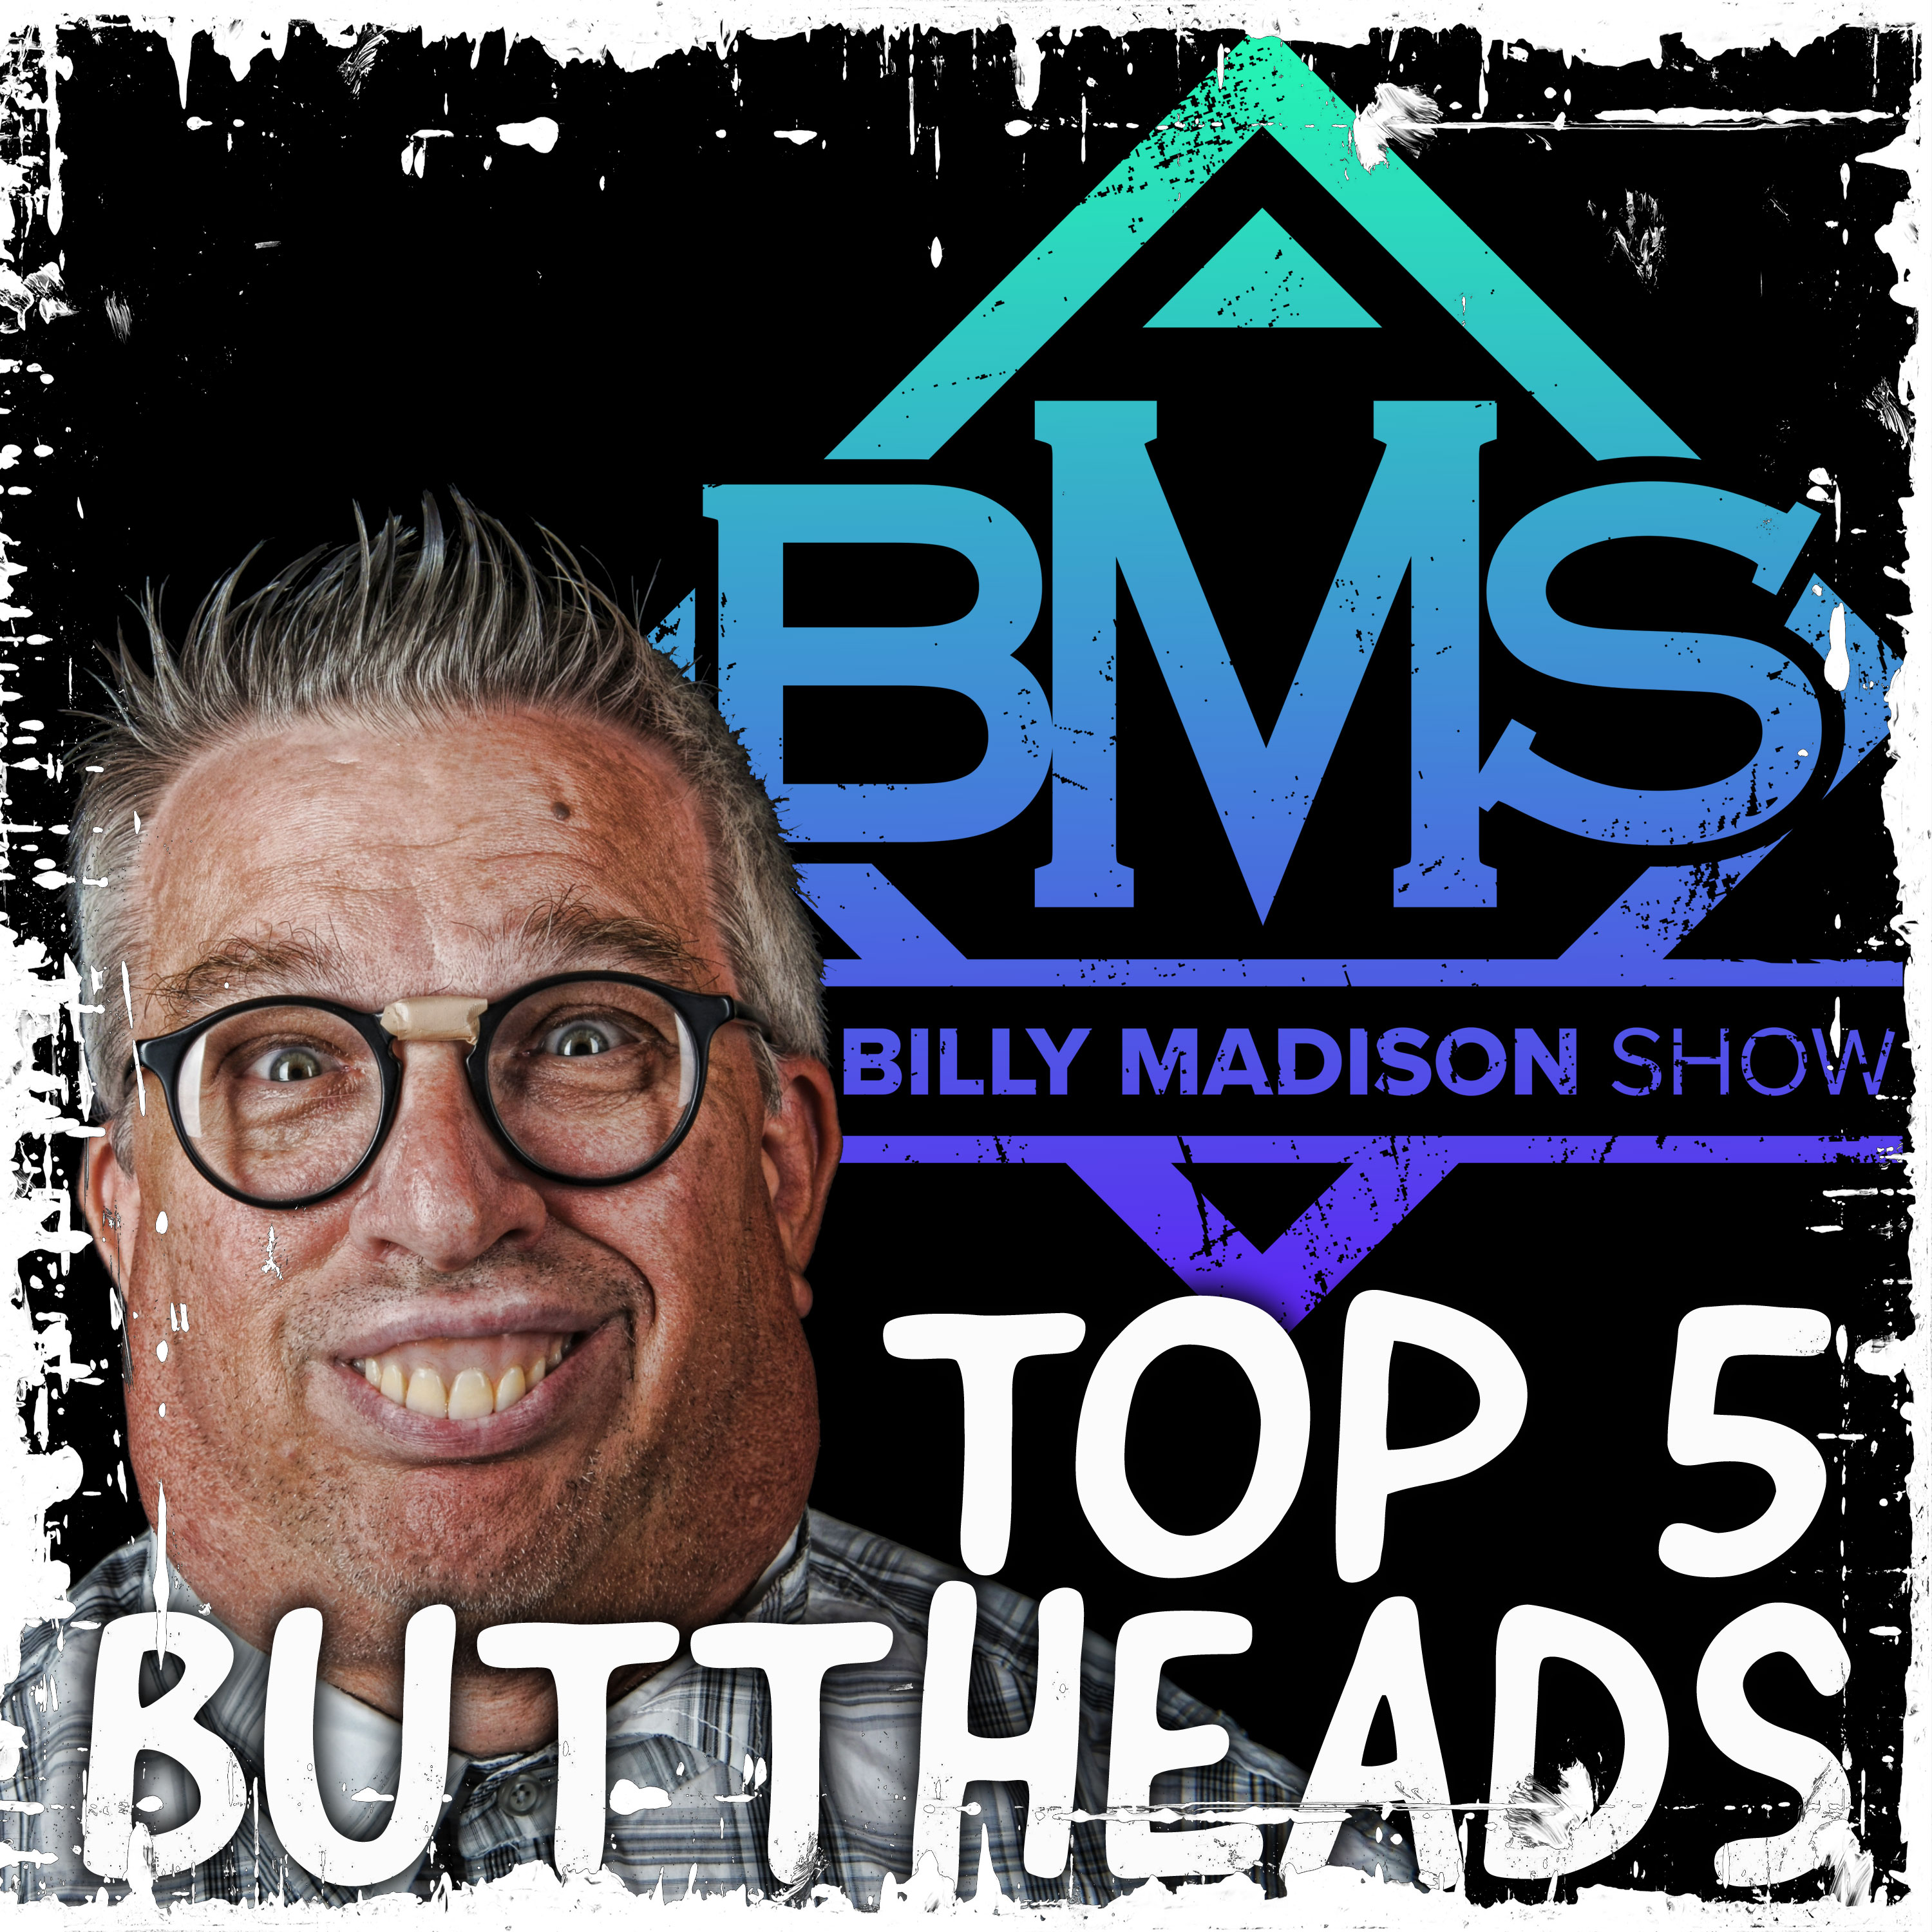 Top 5 Buttheads